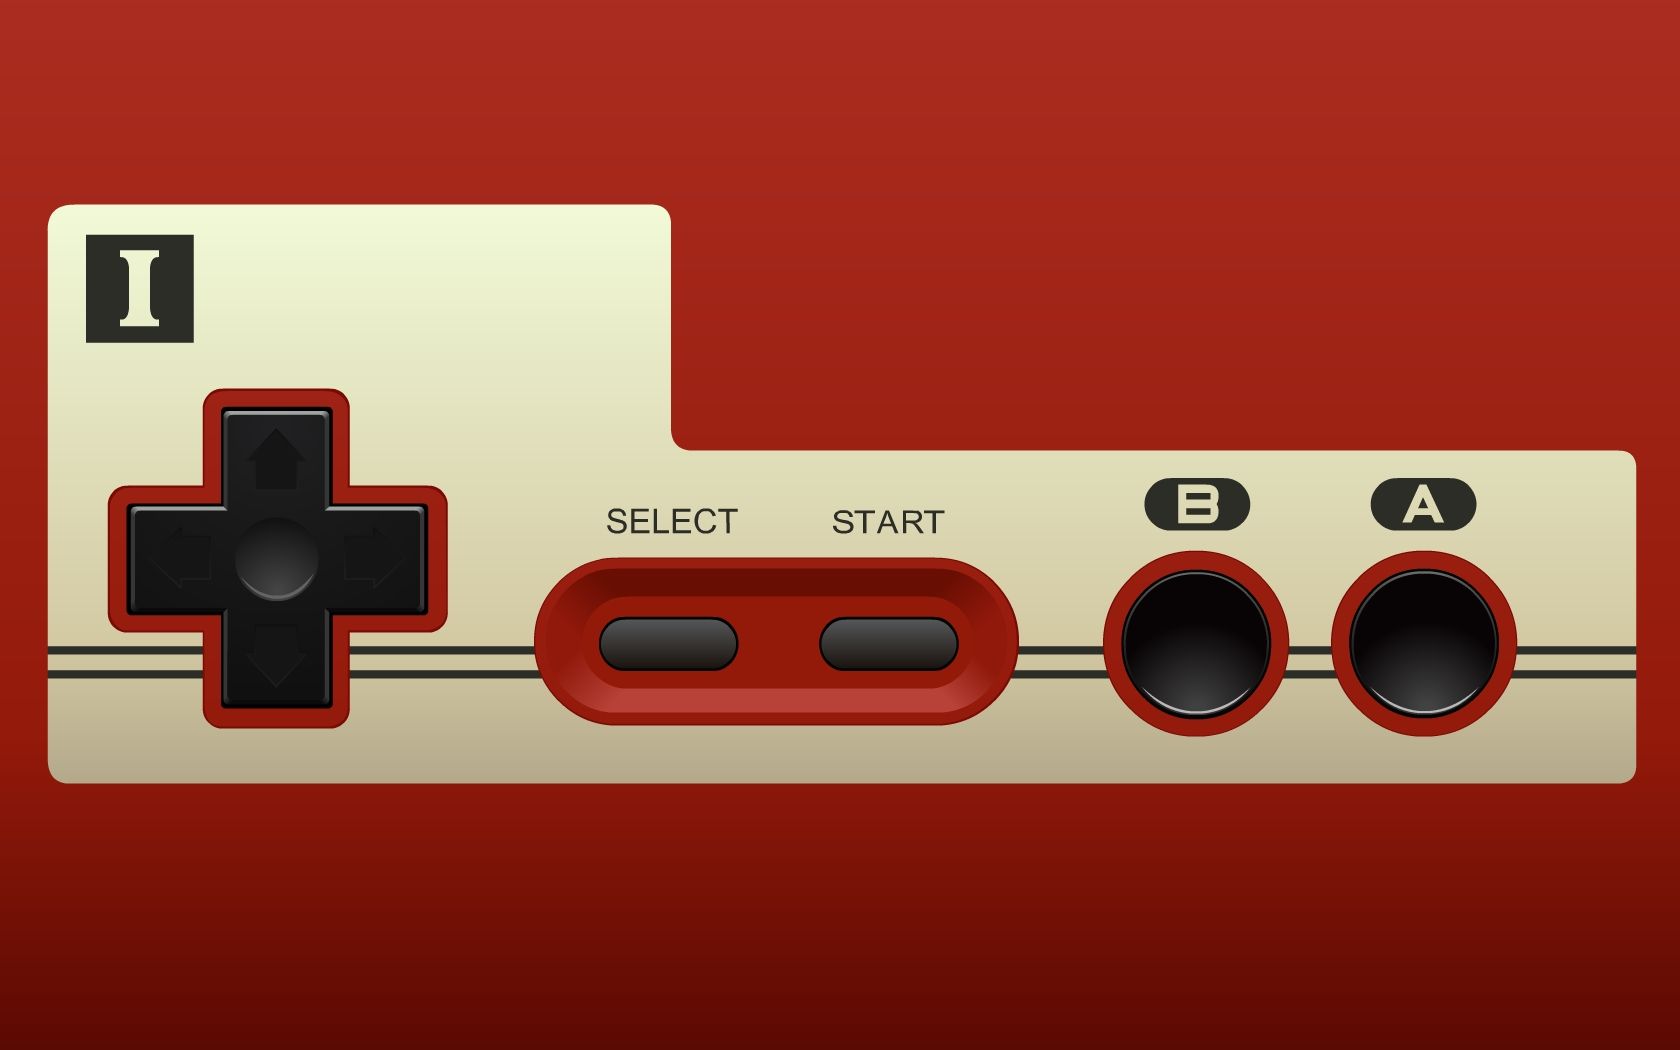 Famicom Controller I By Doctor G. Technology Wallpaper, Creative Games, Wallpaper Pc